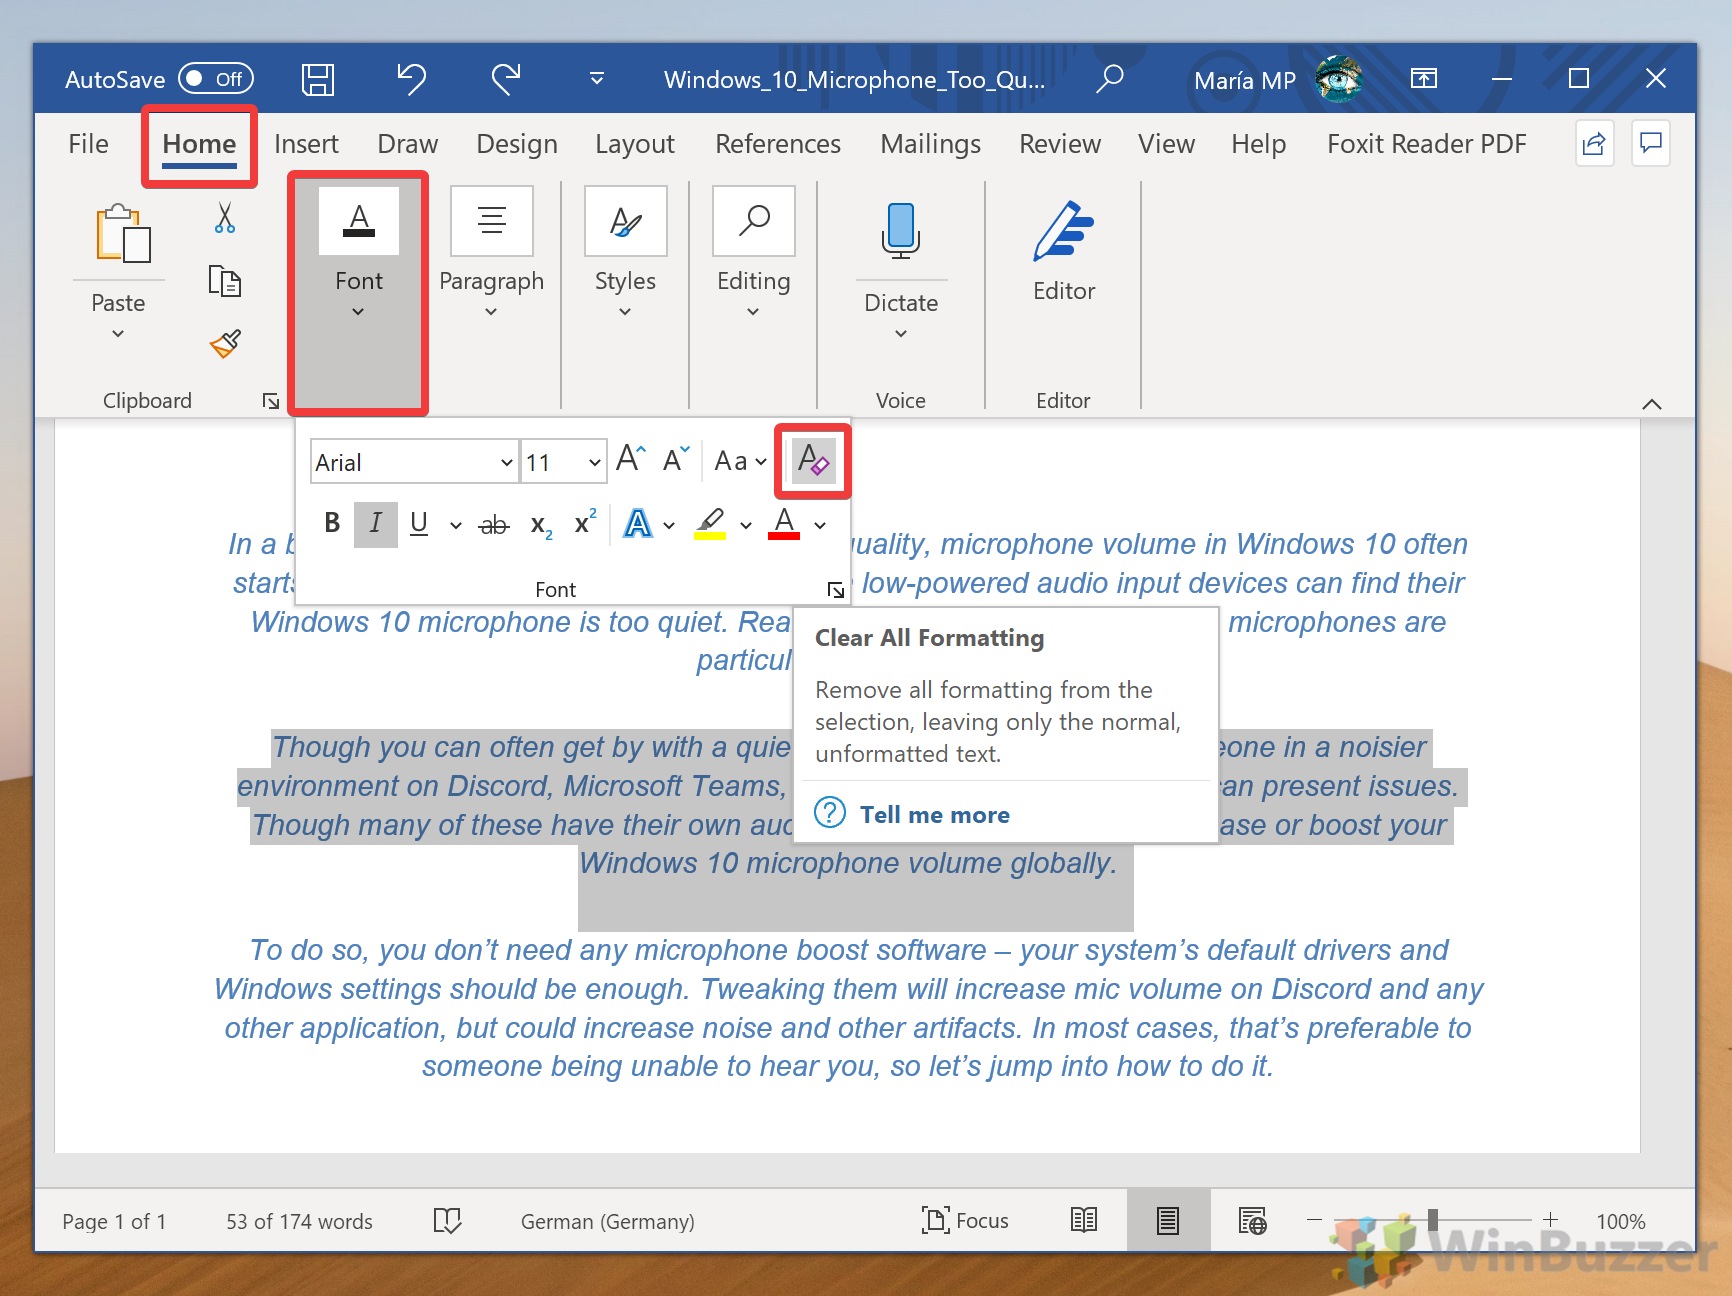 how to clear text formatting in word 2010